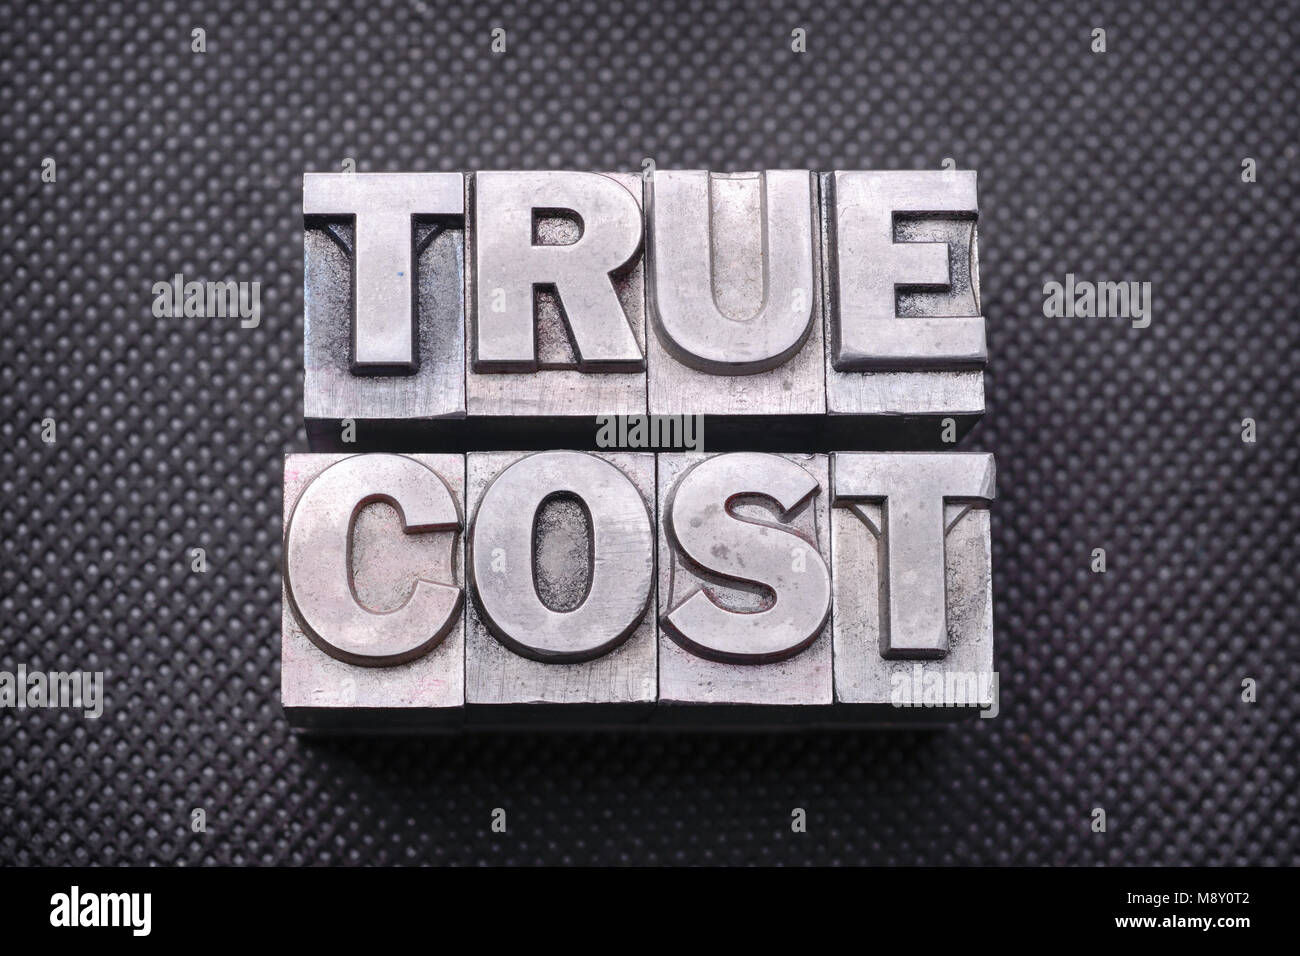 true cost phrase made from metallic letterpress blocks on black perforated surface Stock Photo